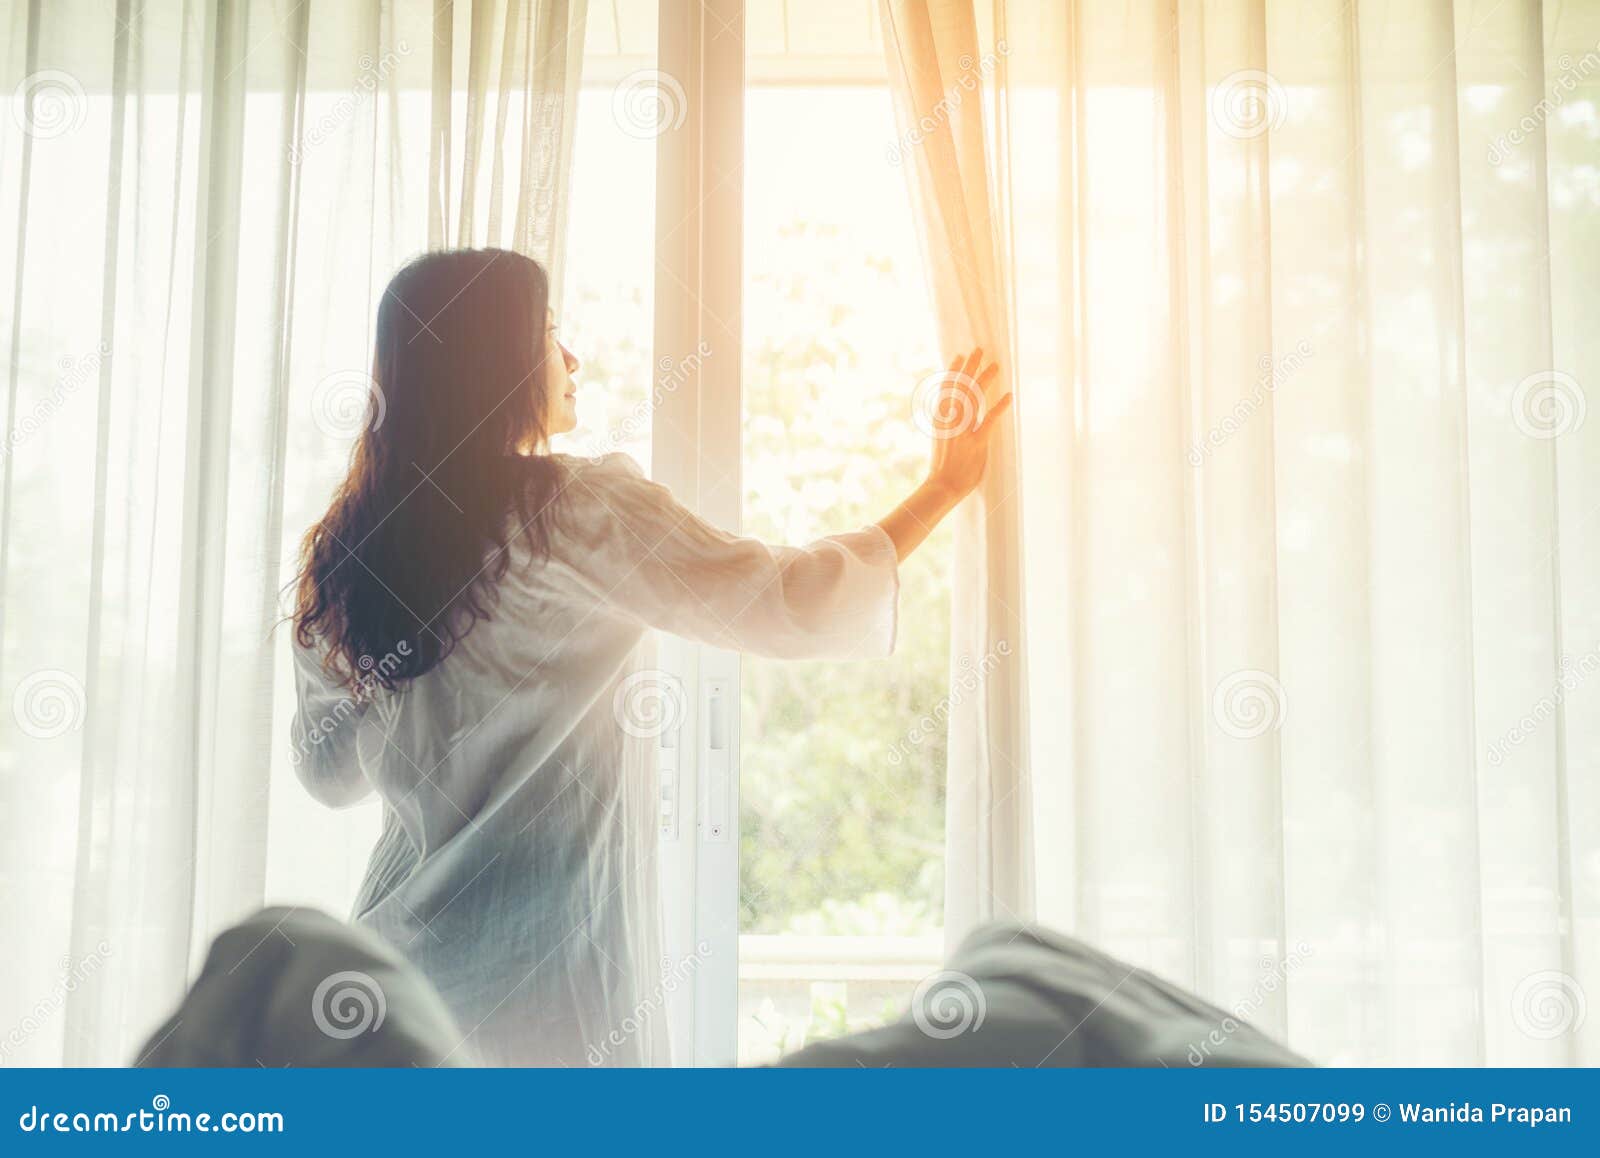 Lifestyle Women Open Window After Get Up The White Bed In Morning ... Open Window At Morning